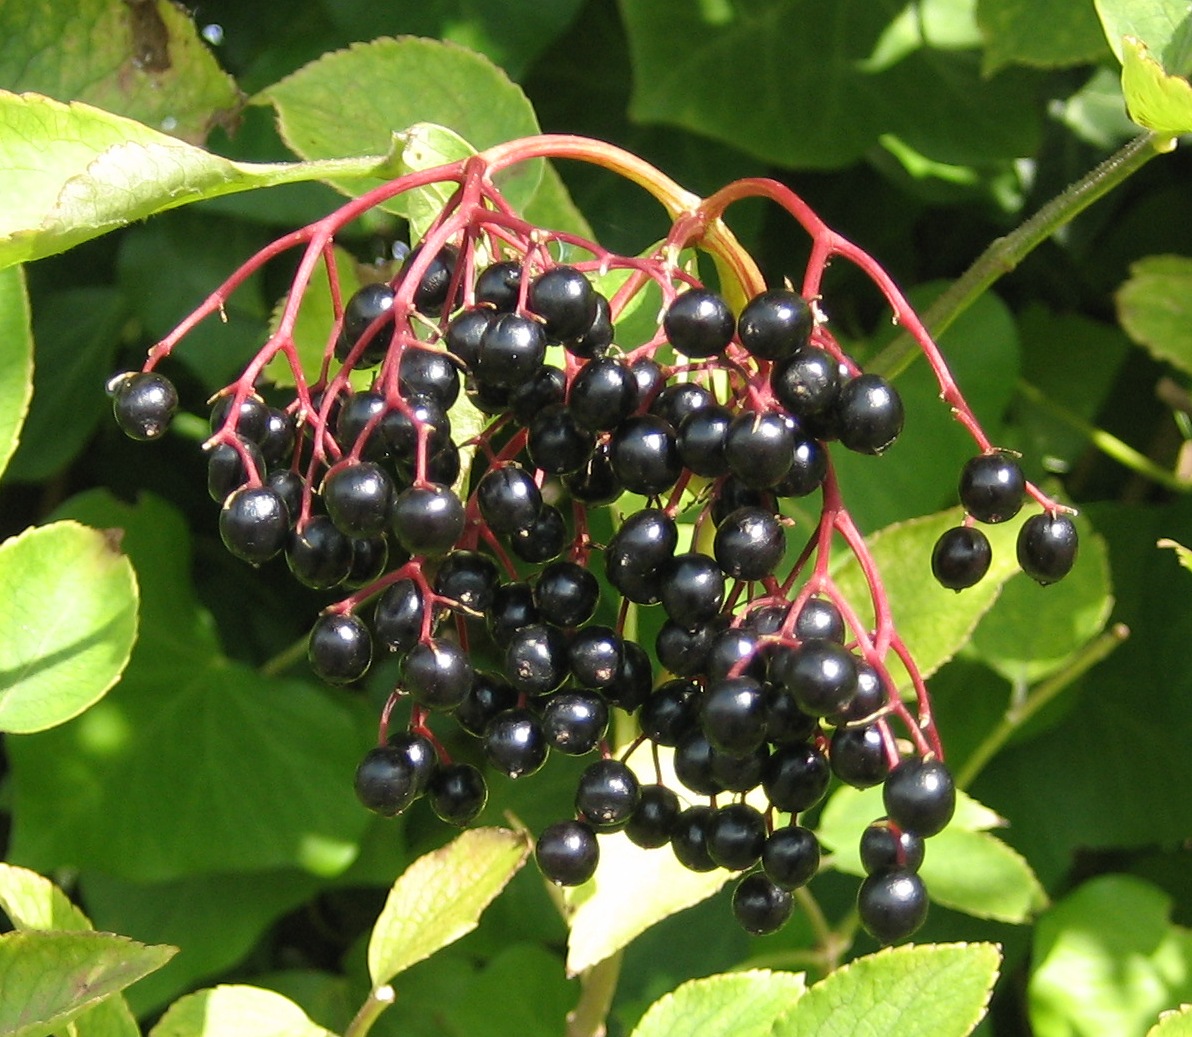 some black berries are growing on the leaves